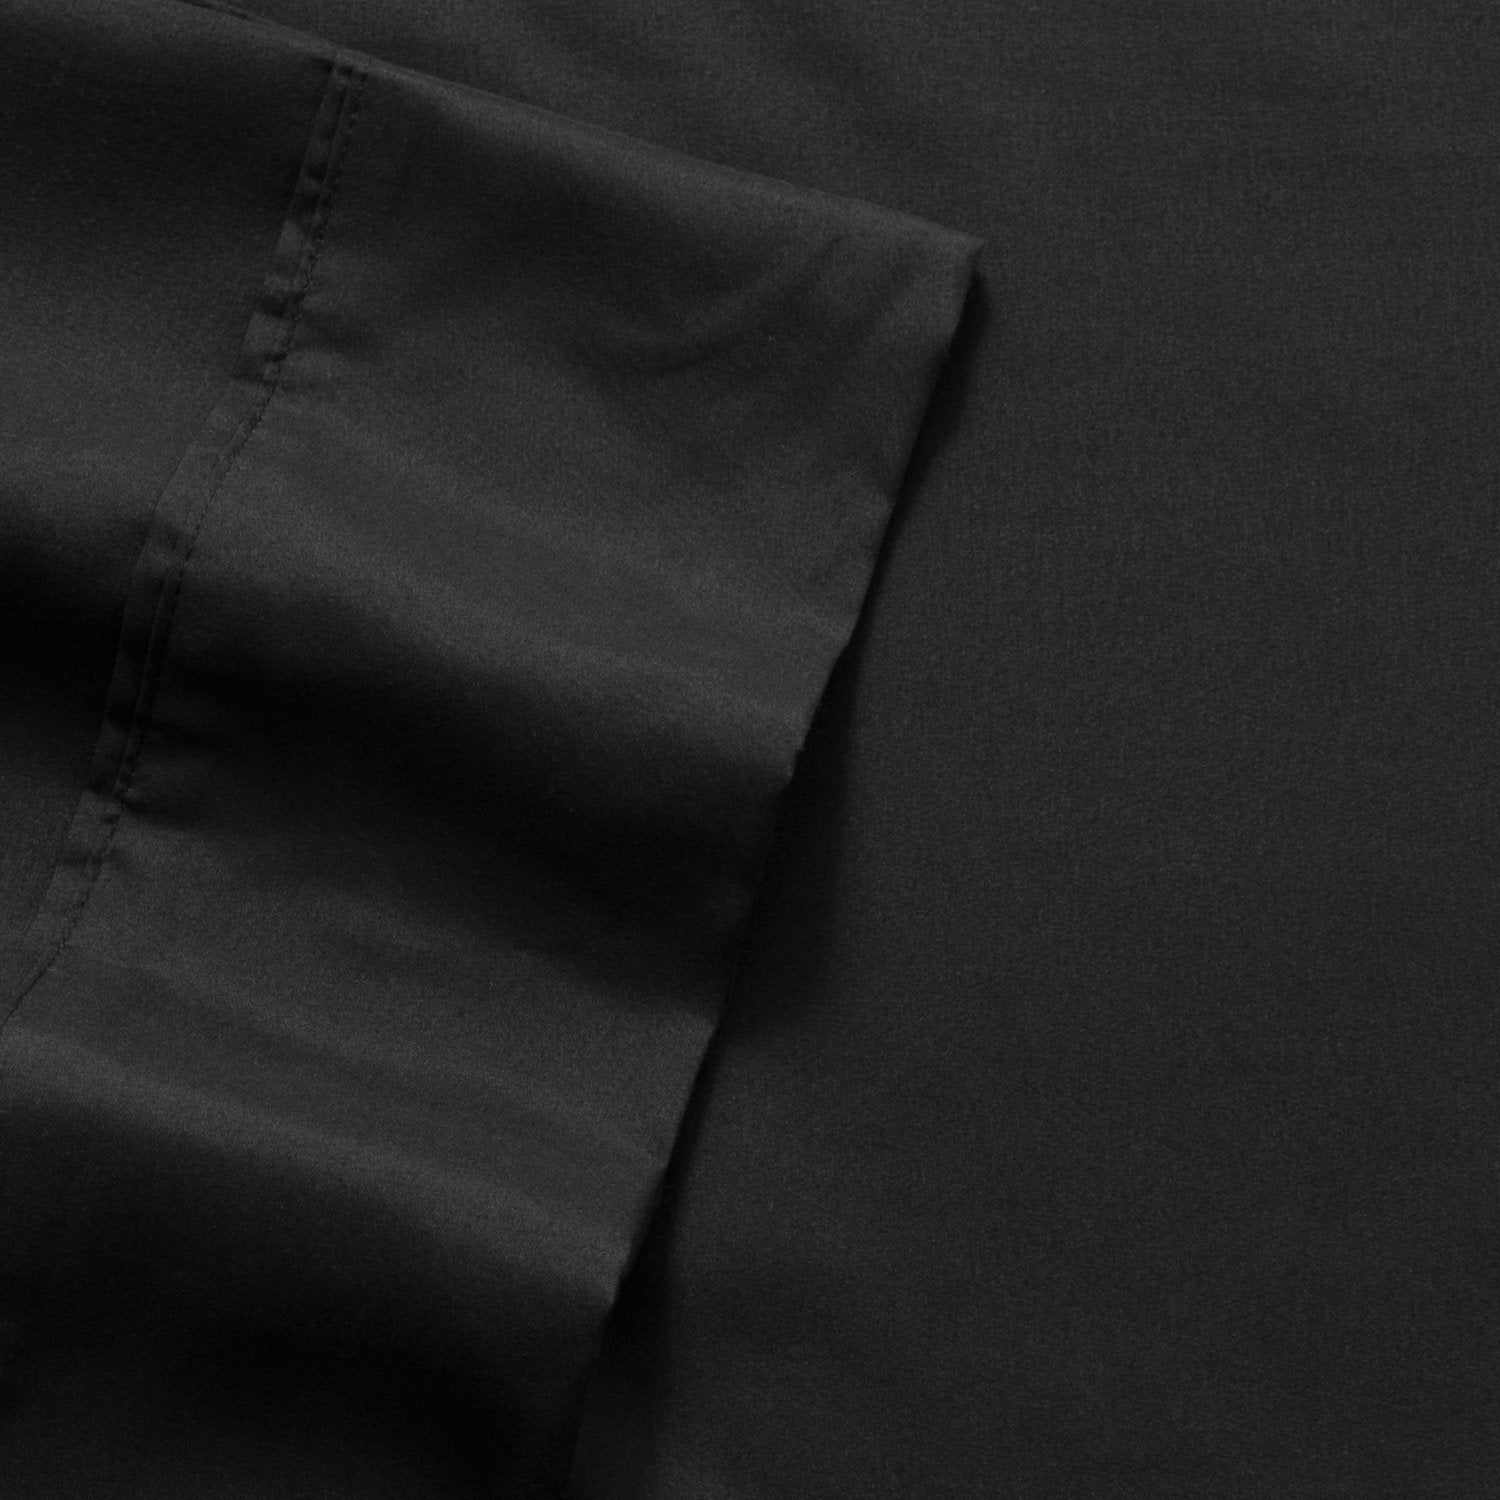 Deluxe 6-Piece Bed Sheet Set (Black) - Fabric